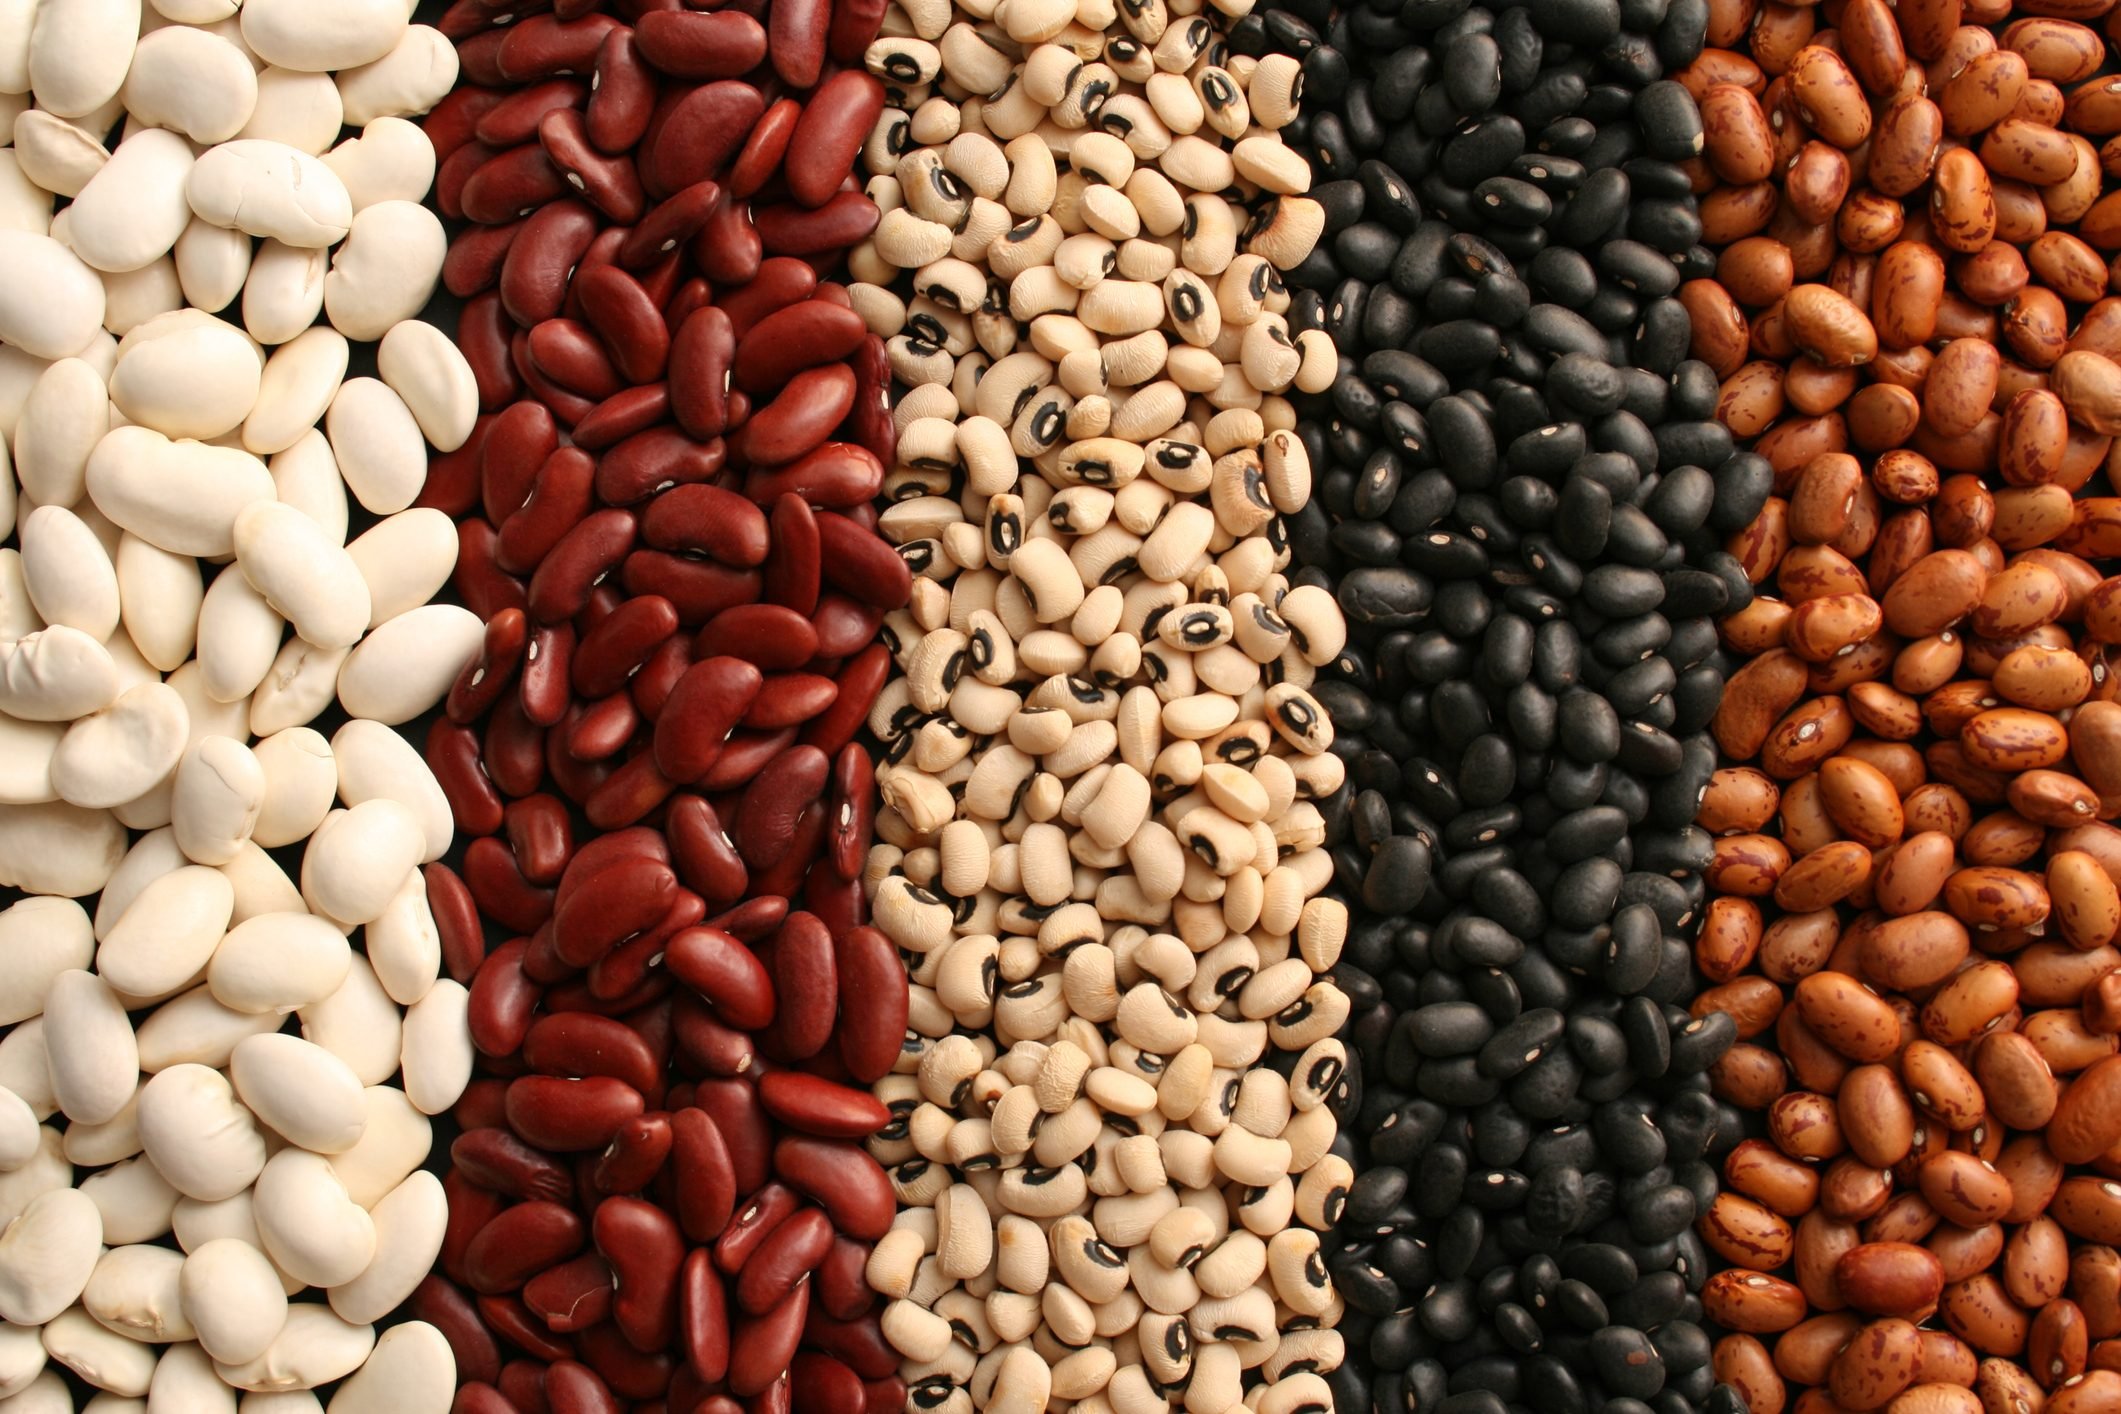 6 Types of Beans to Meet Your Protein Needs